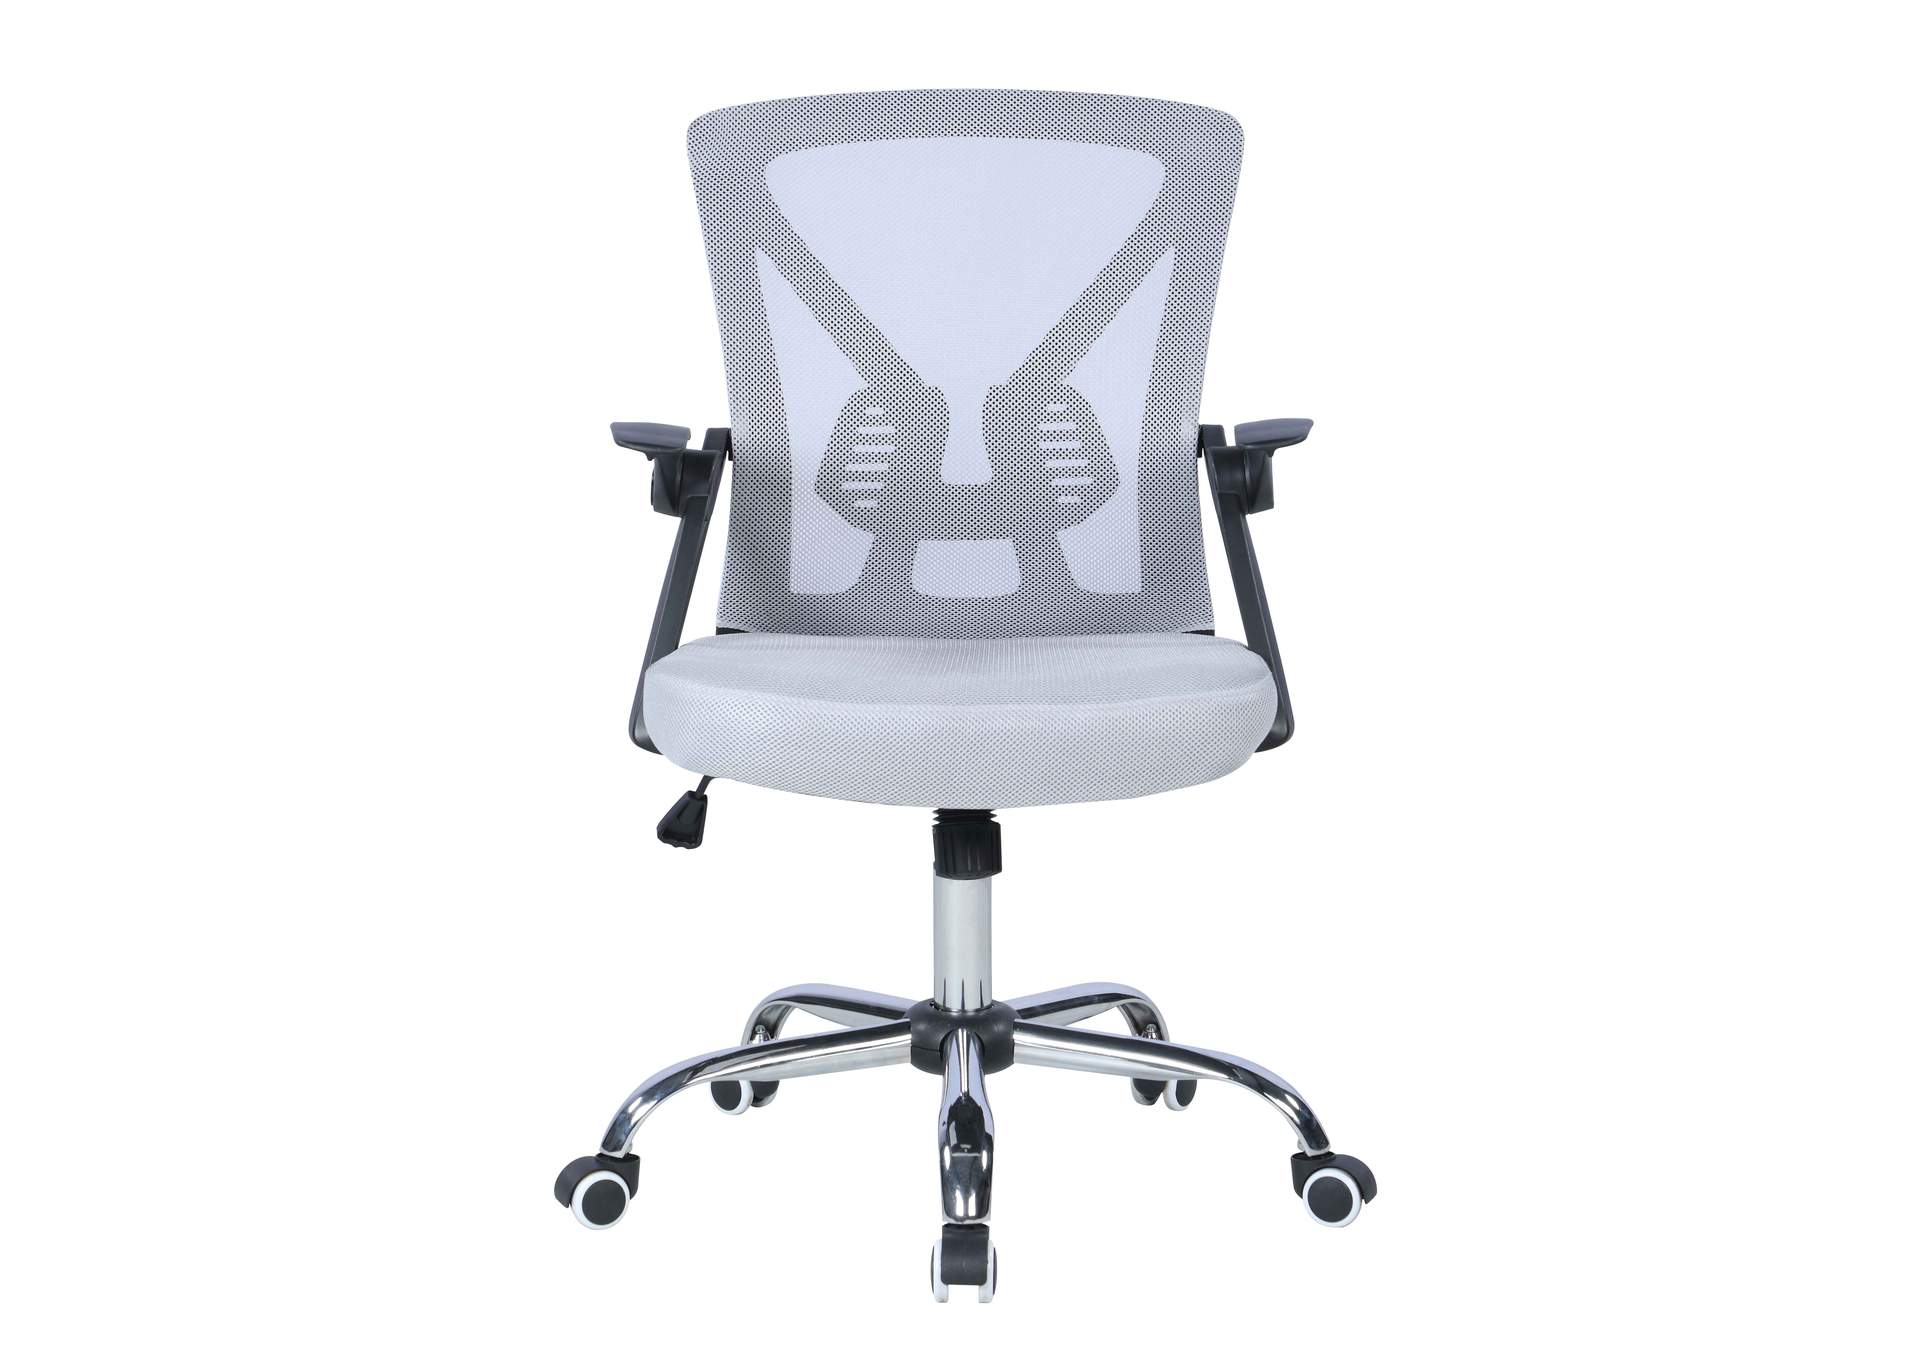 Contemporary Ergonomic Computer Chair With Adjustable Arms,Chintaly Imports